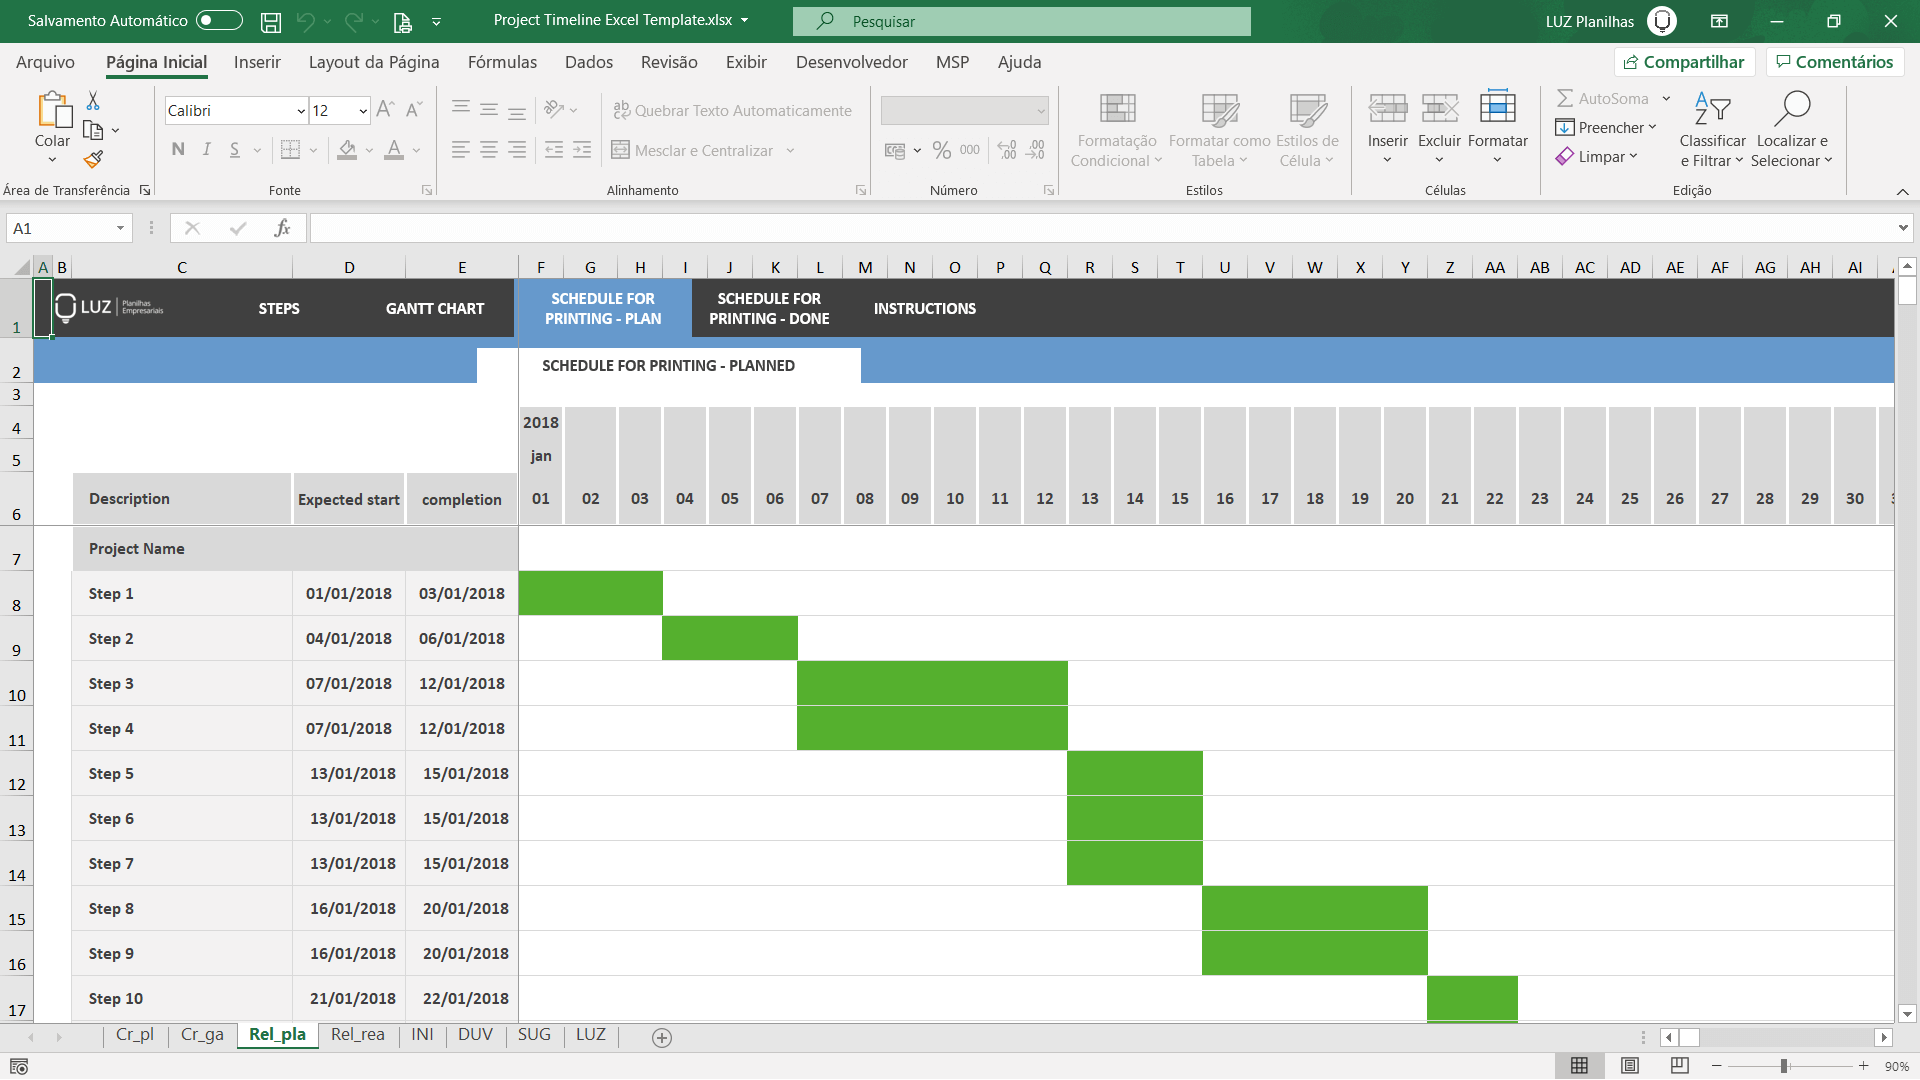 Project Timeline Excel Spreadsheet Template - LUZ Templates